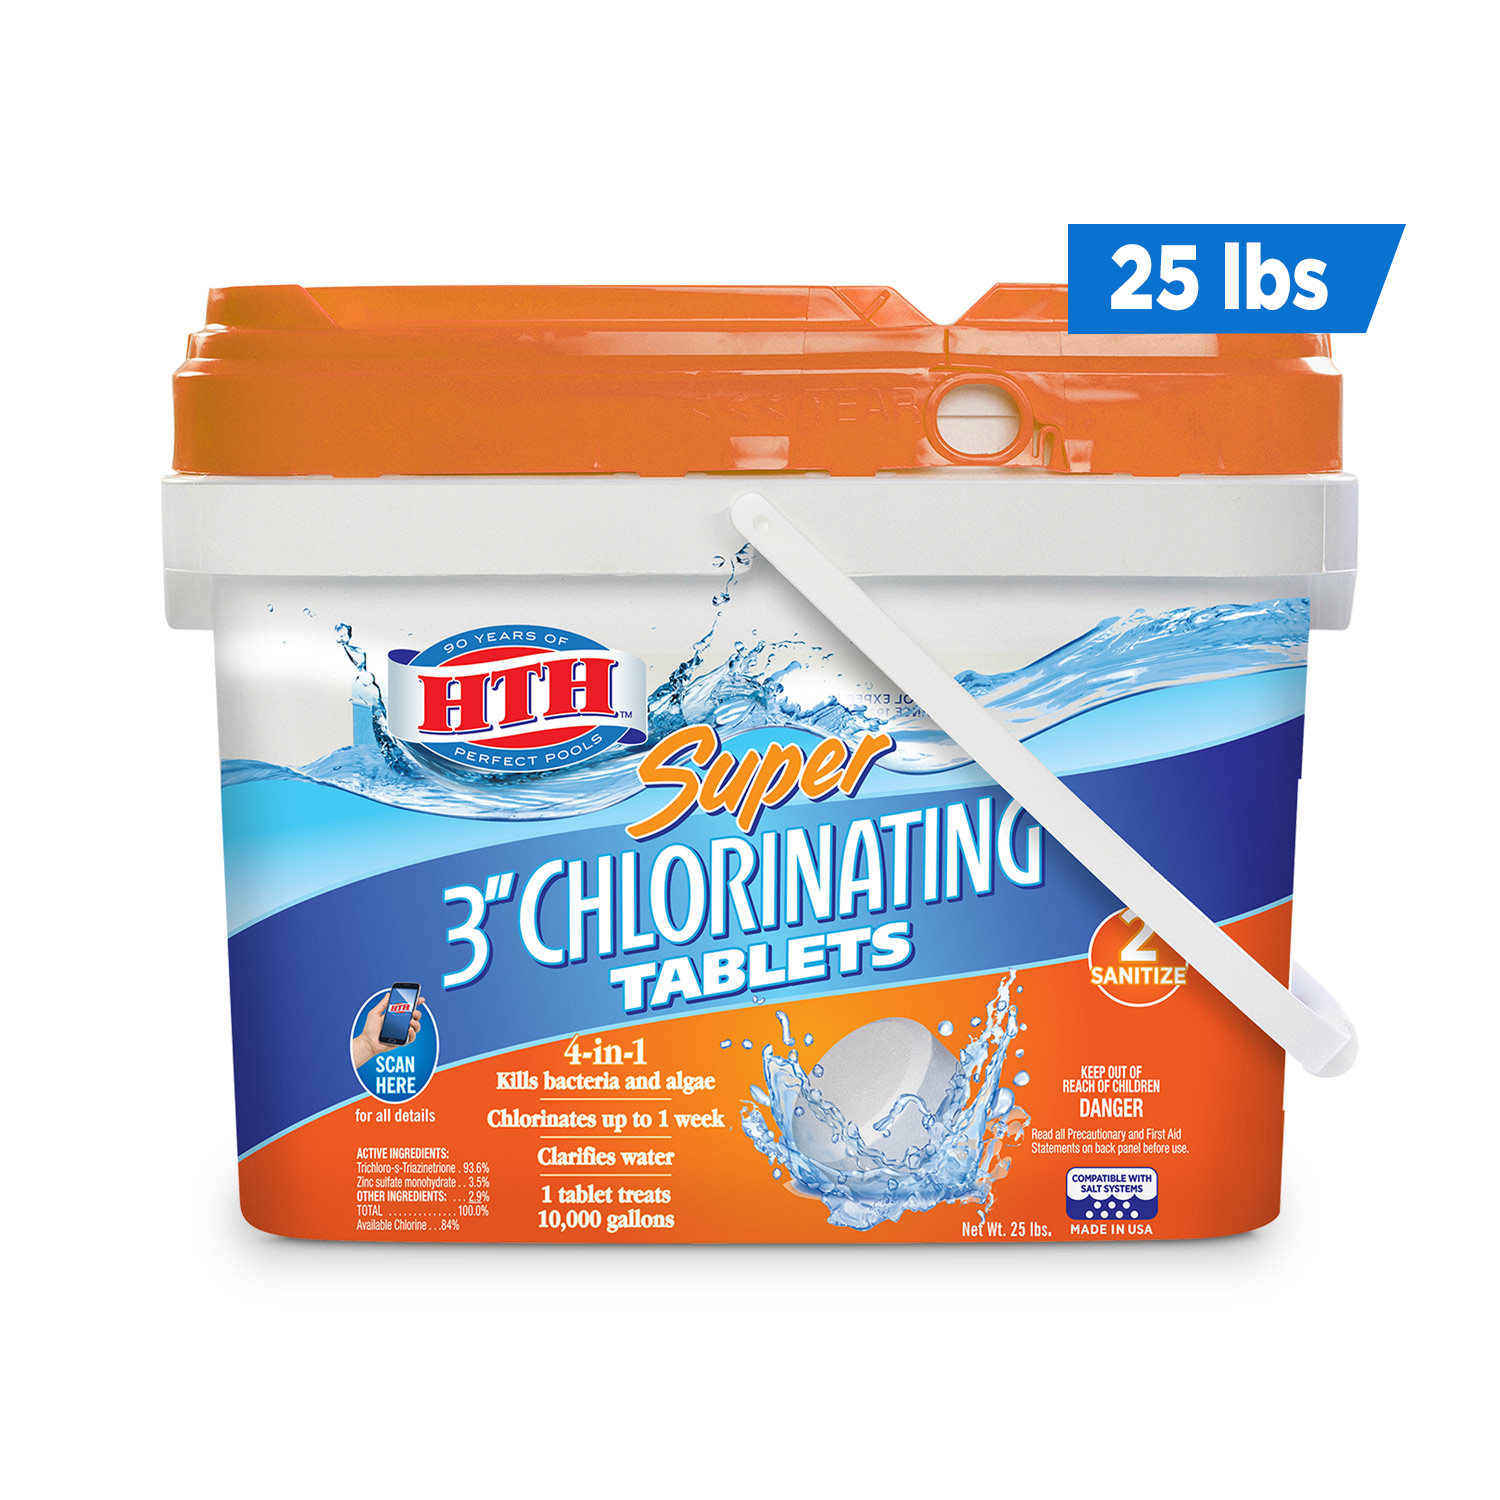 HTH Super 3 inch Chlorinating Tablets for sanitizing Swimming Pools, 25 ...